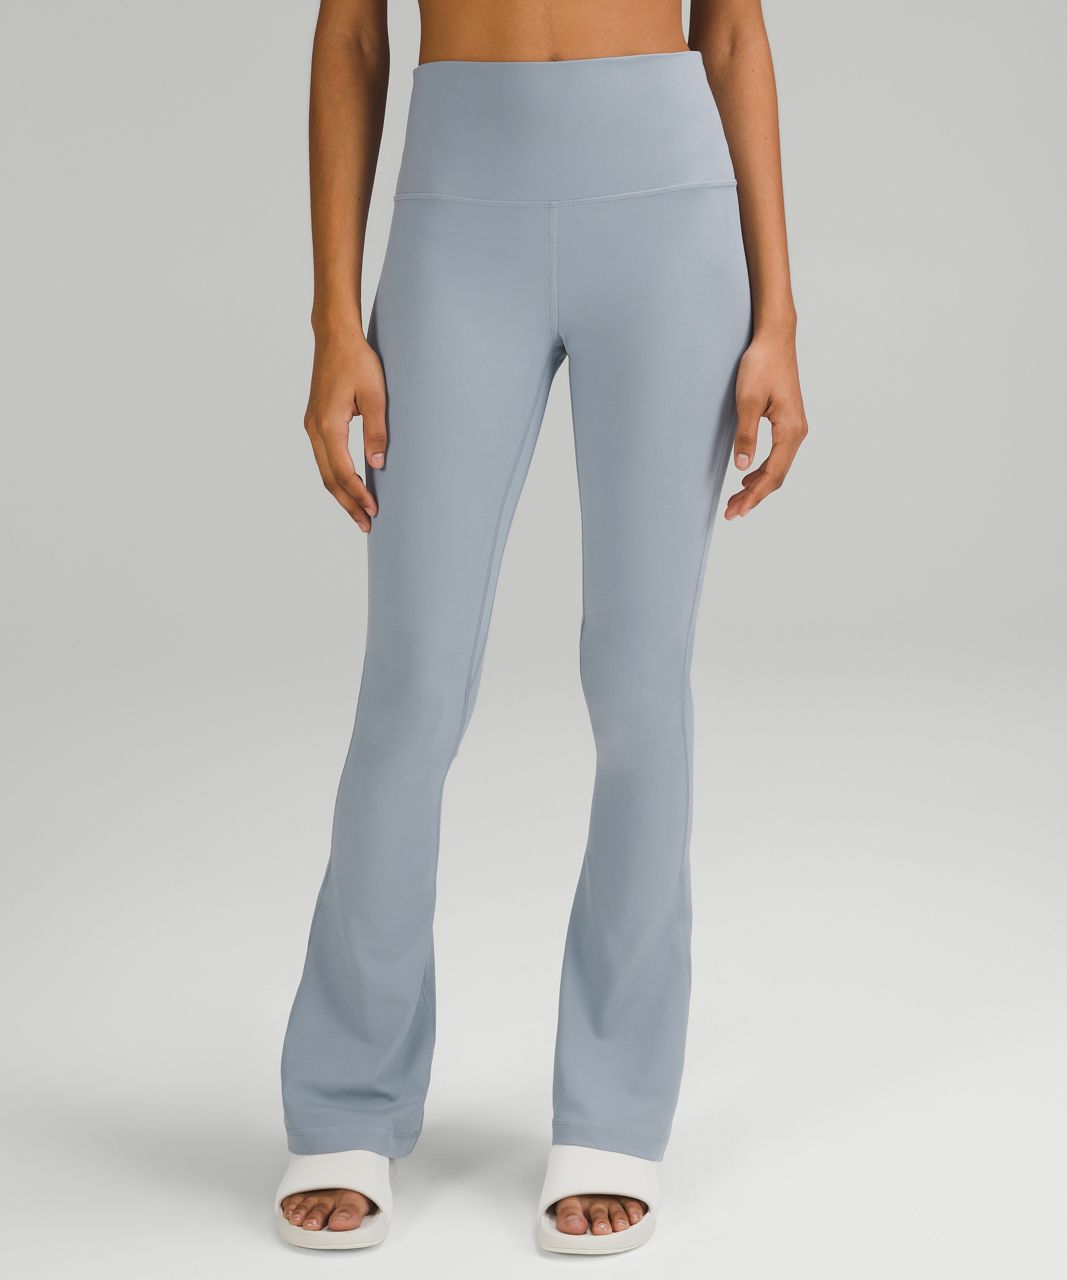 Lulu Groove Pants Duped  International Society of Precision